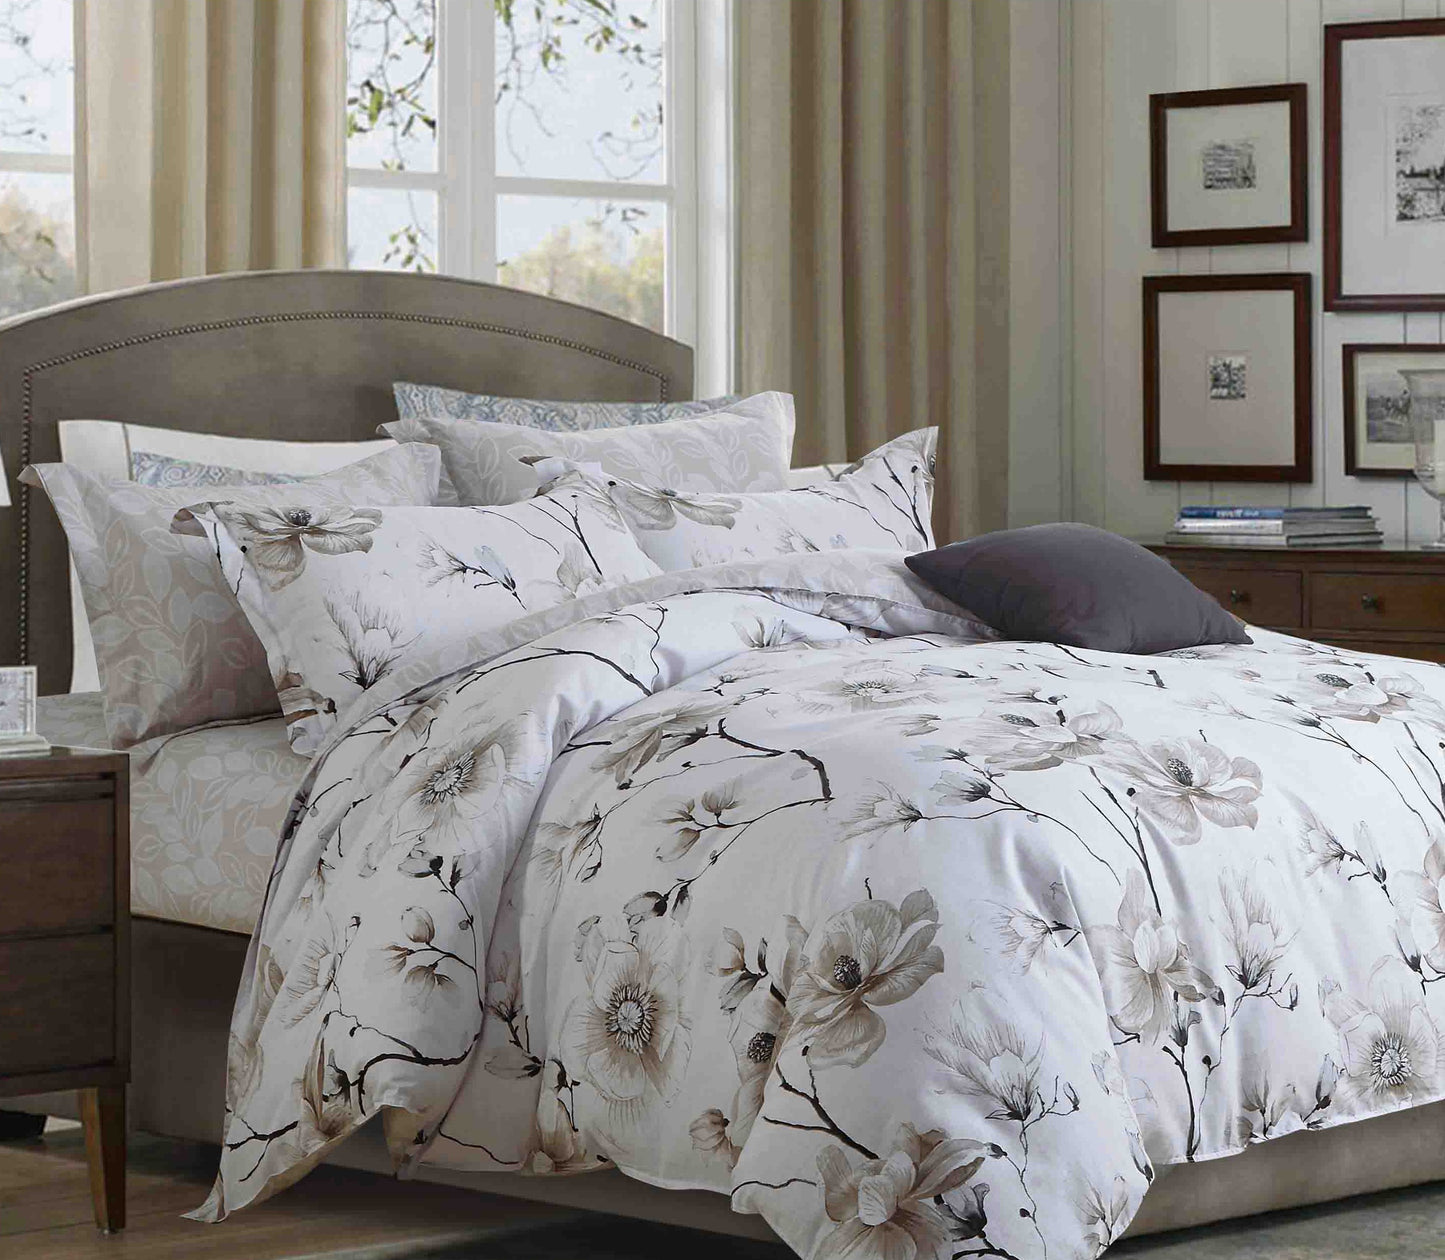 Juan Brown and White Floral 100% Cotton Comforter Set